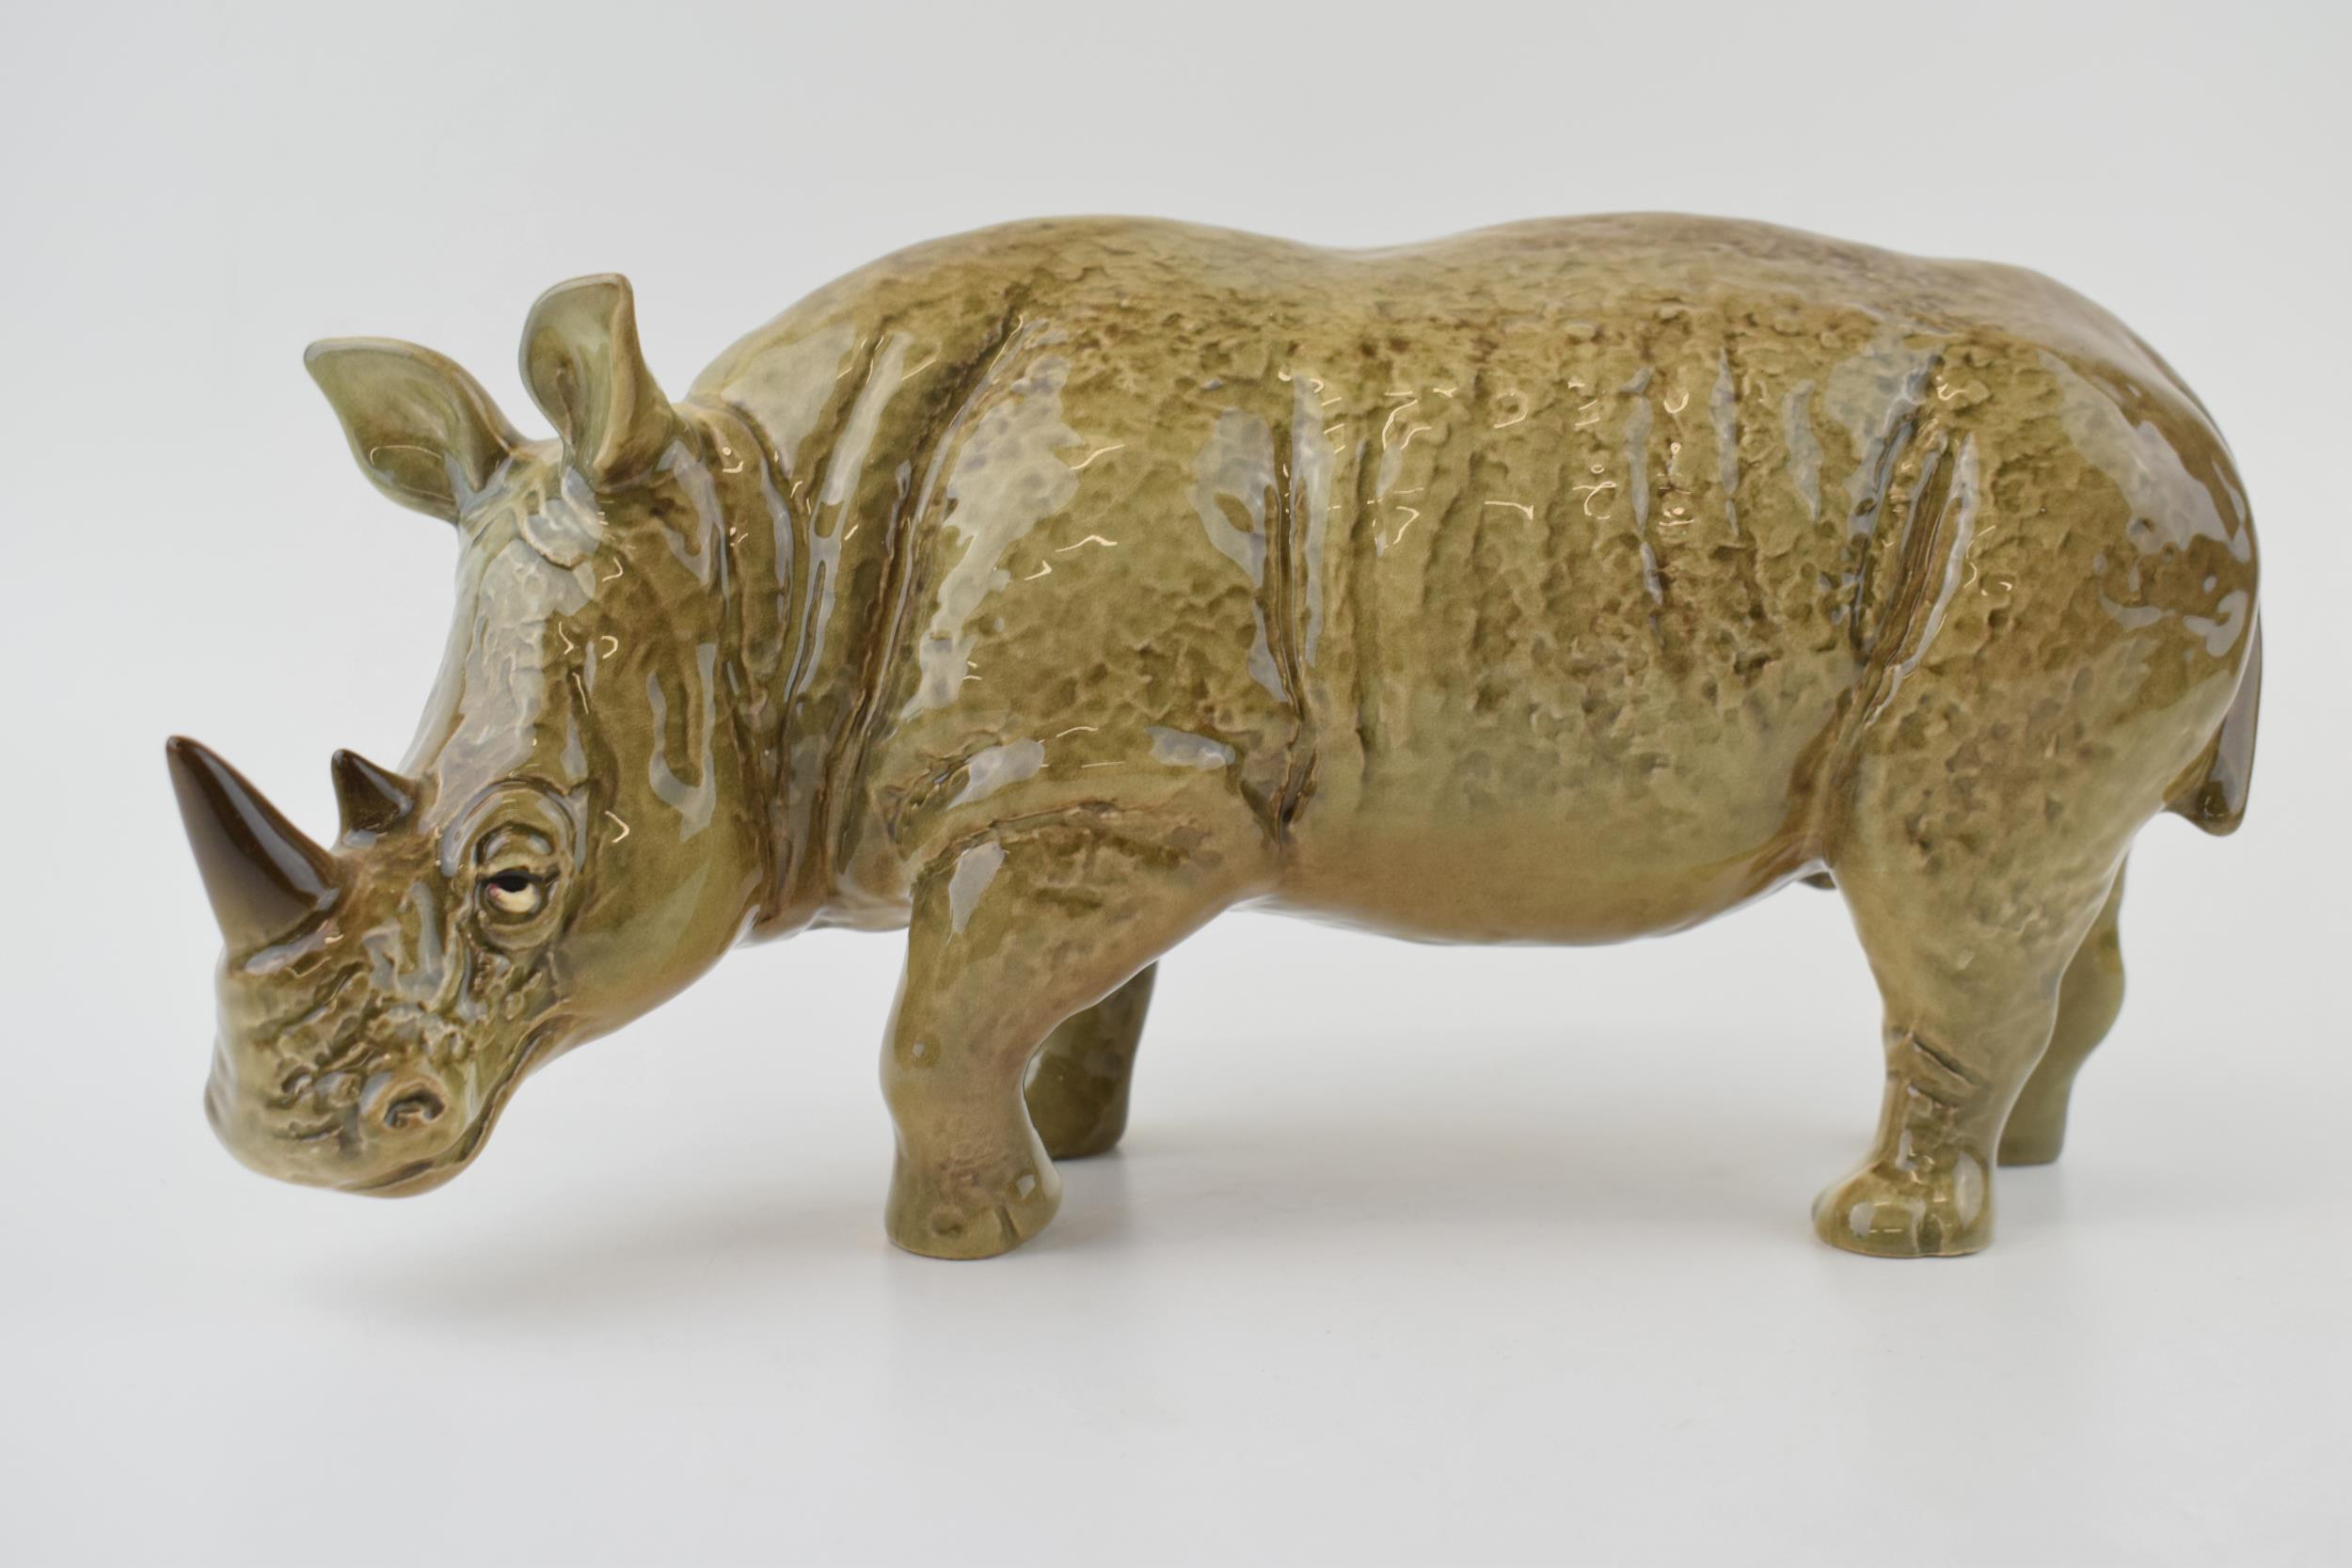 Sylvac model of a Rhinoceros 5166. In good condition with no obvious damage or restoration.